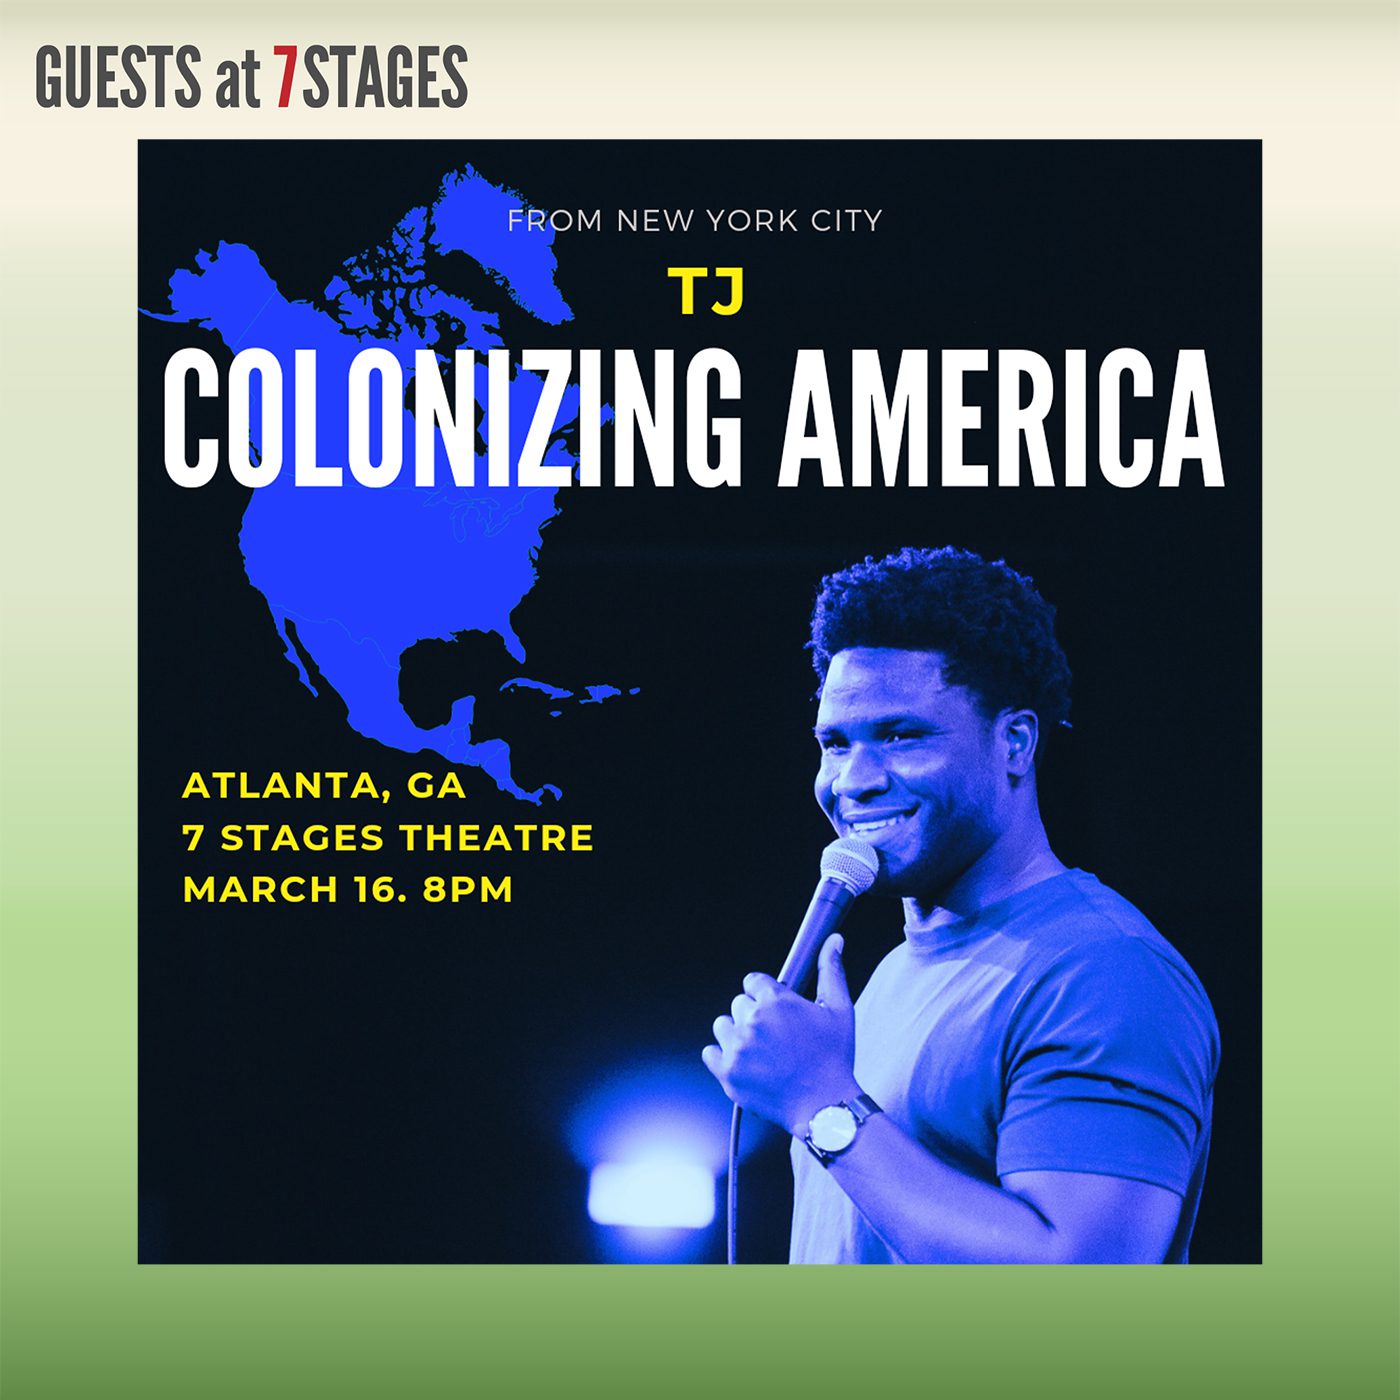 Guests at 7 Stages: From New York City. TJ. Colonizing America. Atlanta, GA. 7 Stages Theatre. March 16, 8 P.M.